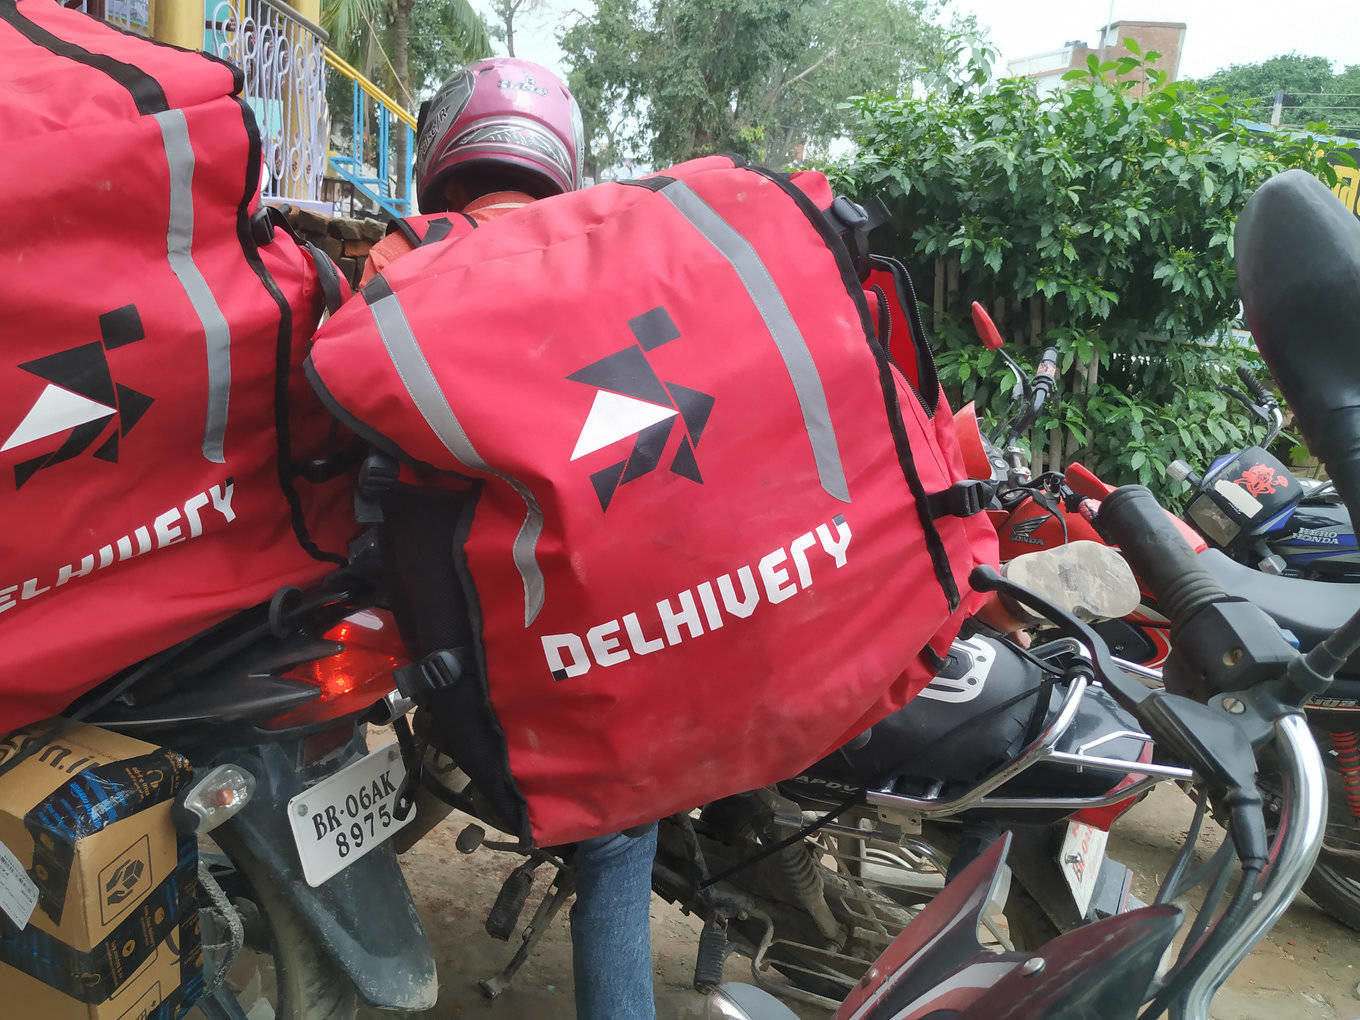 Delhivery Looks At B2B Acquisitions To Grow Beyond Ecommerce Deliveries